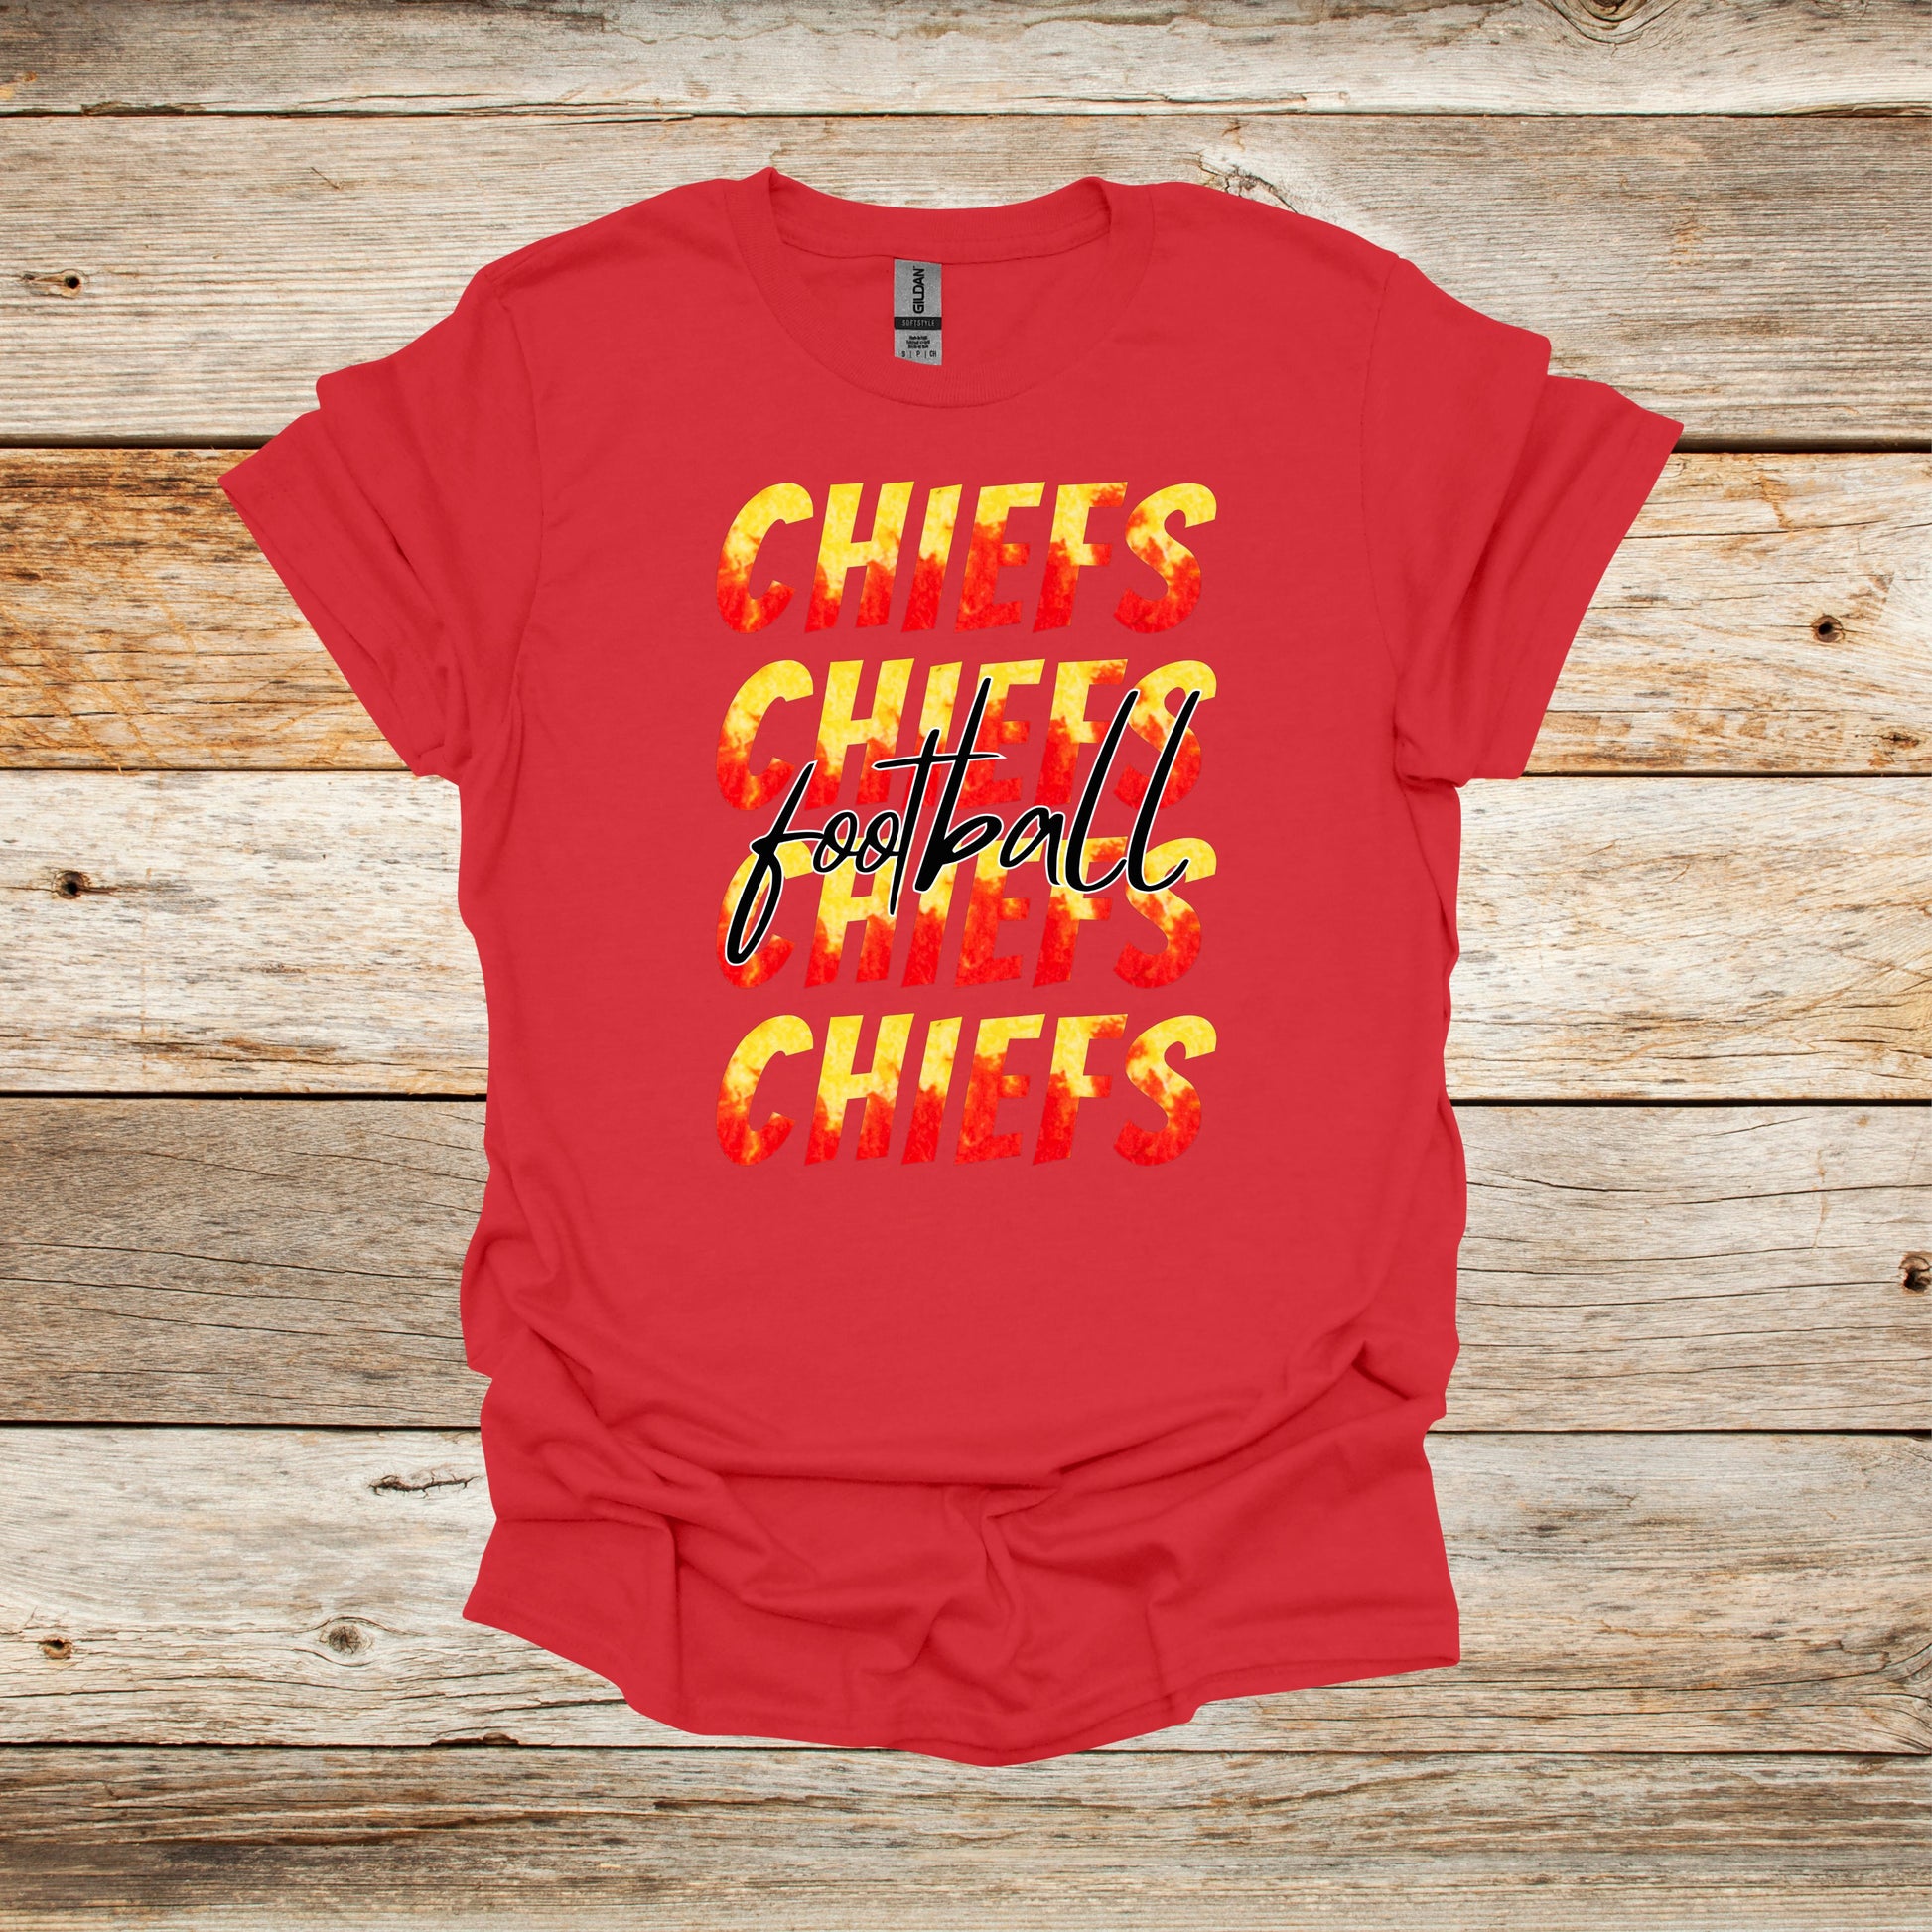 Football T-Shirt - Kansas City Chiefs - Chiefs Football - Adult and Children's Tee Shirts - Sports T-Shirts Graphic Avenue Red Adult Small 